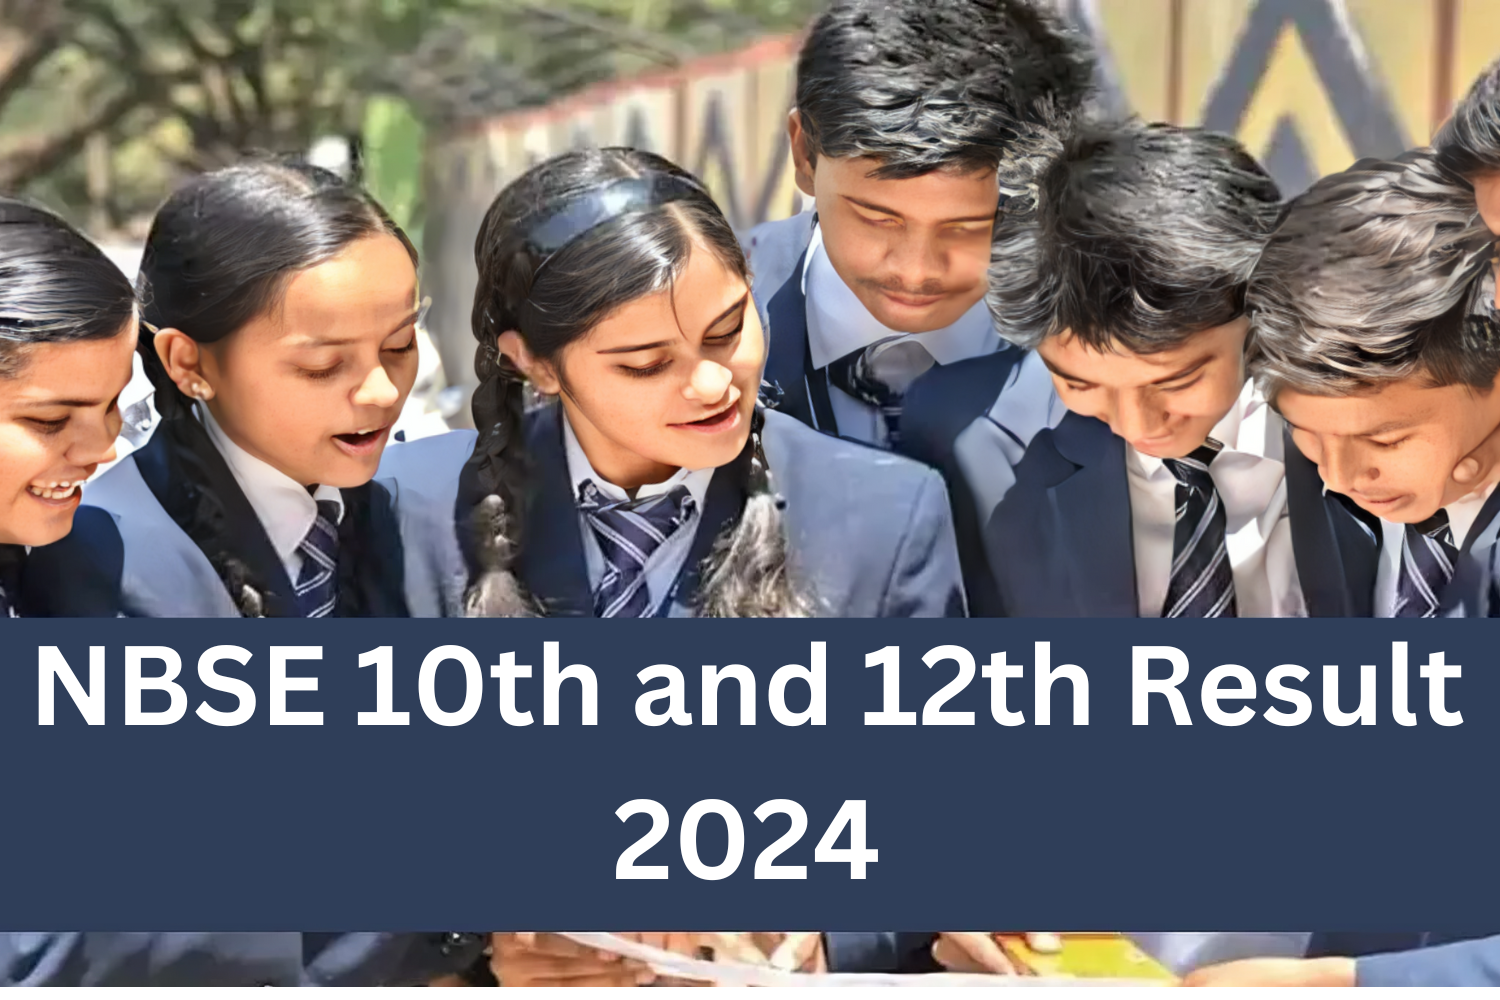 How To Check NBSE 10th And 12th Result 2024? step by step process of Checking NBSE 10th And 12th Result.